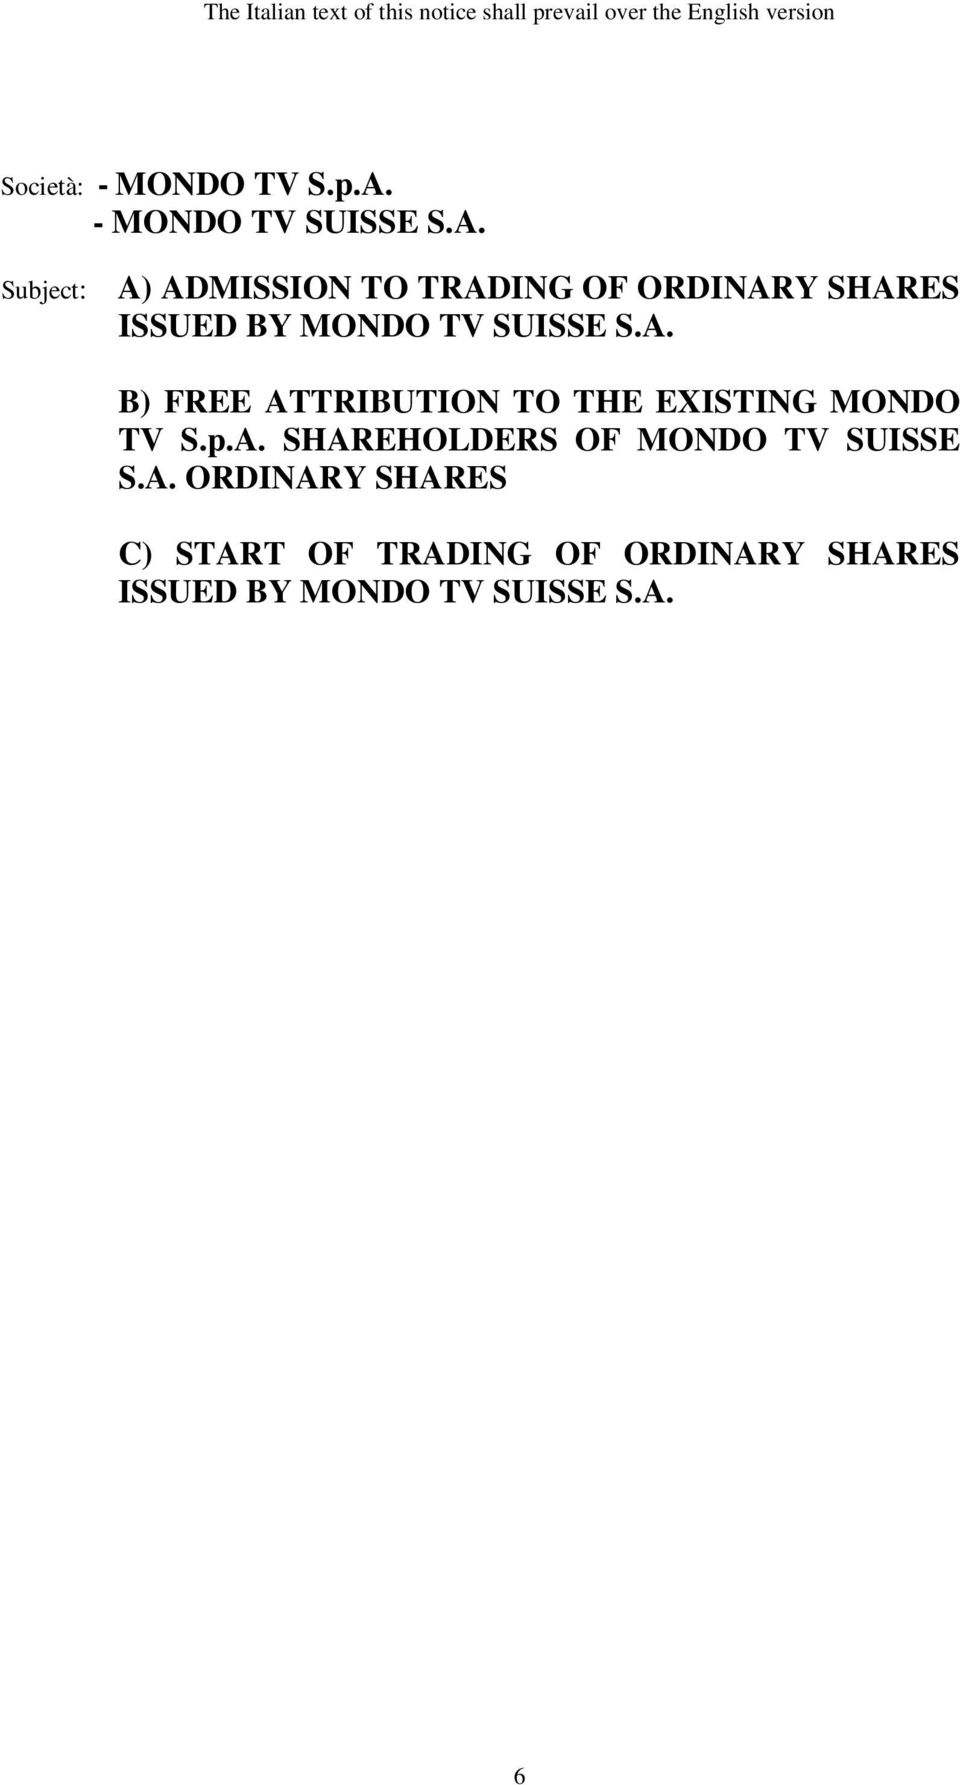 Subject: A) ADMISSION TO TRADING OF ORDINARY SHARES ISSUED BY MONDO TV SUISSE S.A. B) FREE ATTRIBUTION TO THE EXISTING MONDO TV S.